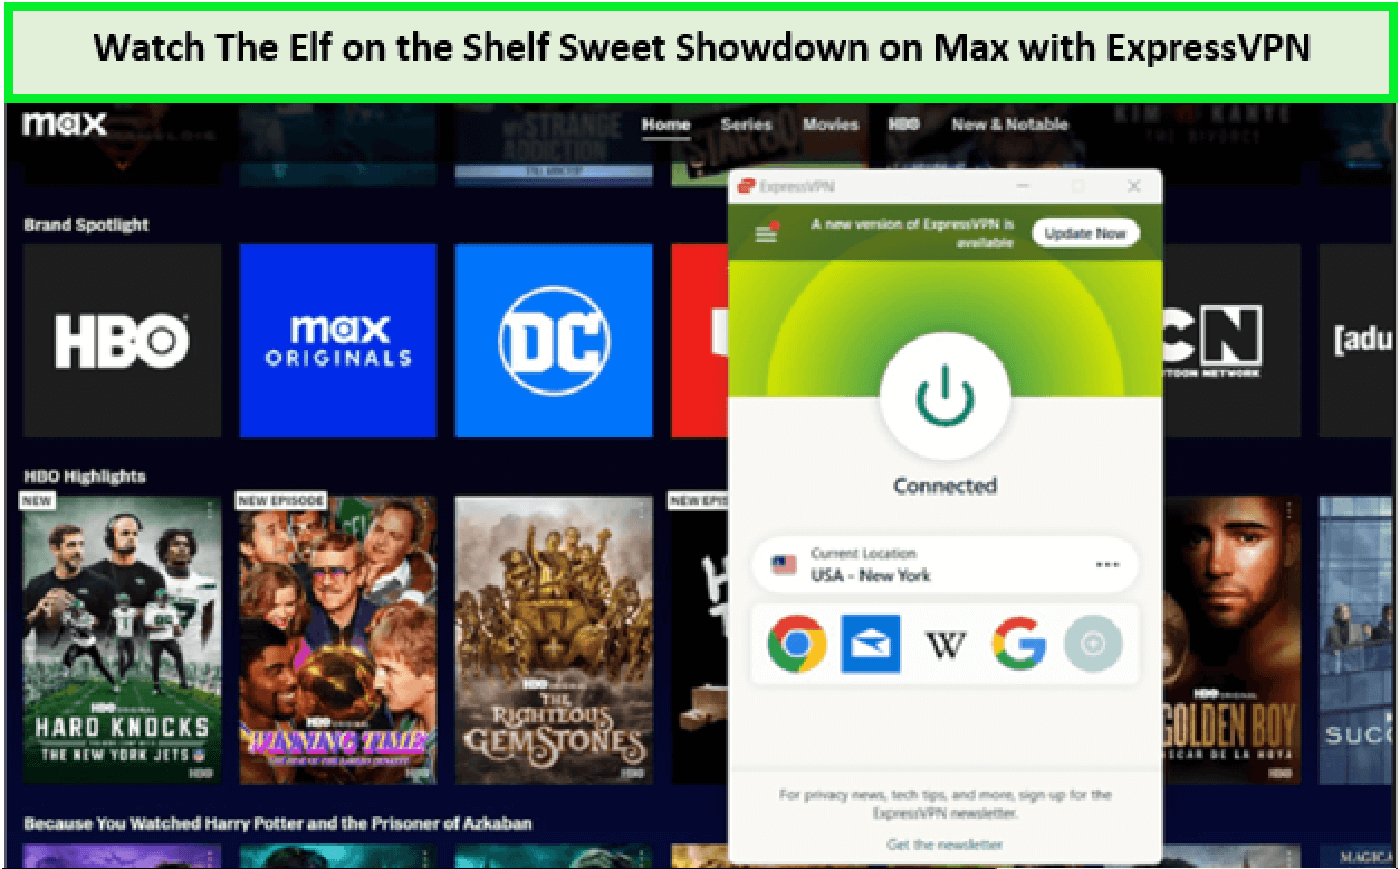 Watch-The-Elf-on-the-Shelf-Sweet-Showdown-in-France-on-Max-with-ExpressVPN